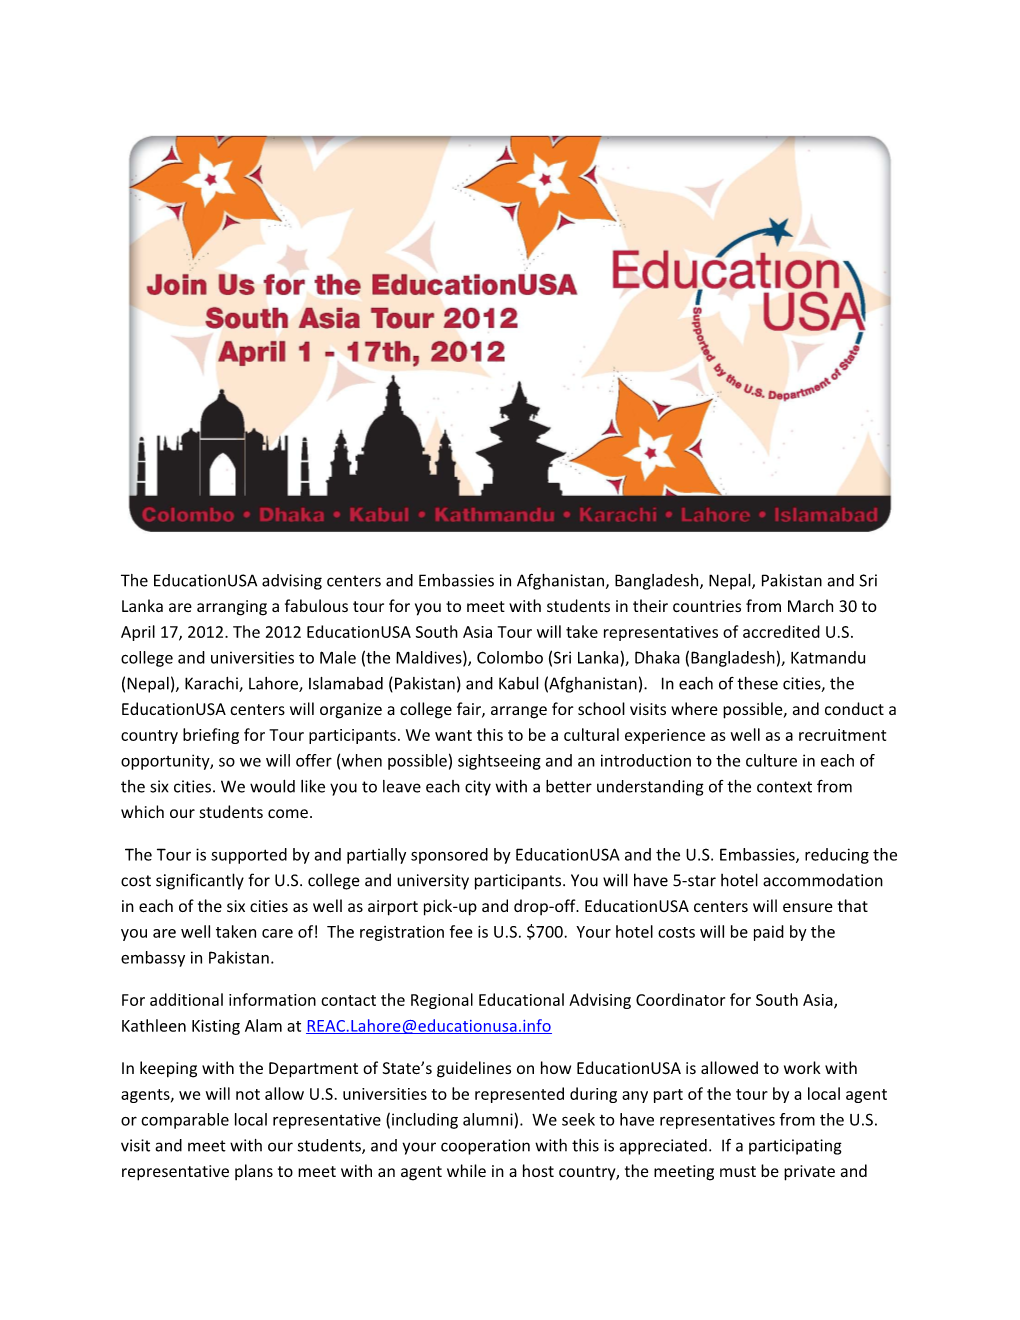 The Tour Is Supported by and Partially Sponsored by Educationusa and the U.S. Embassies